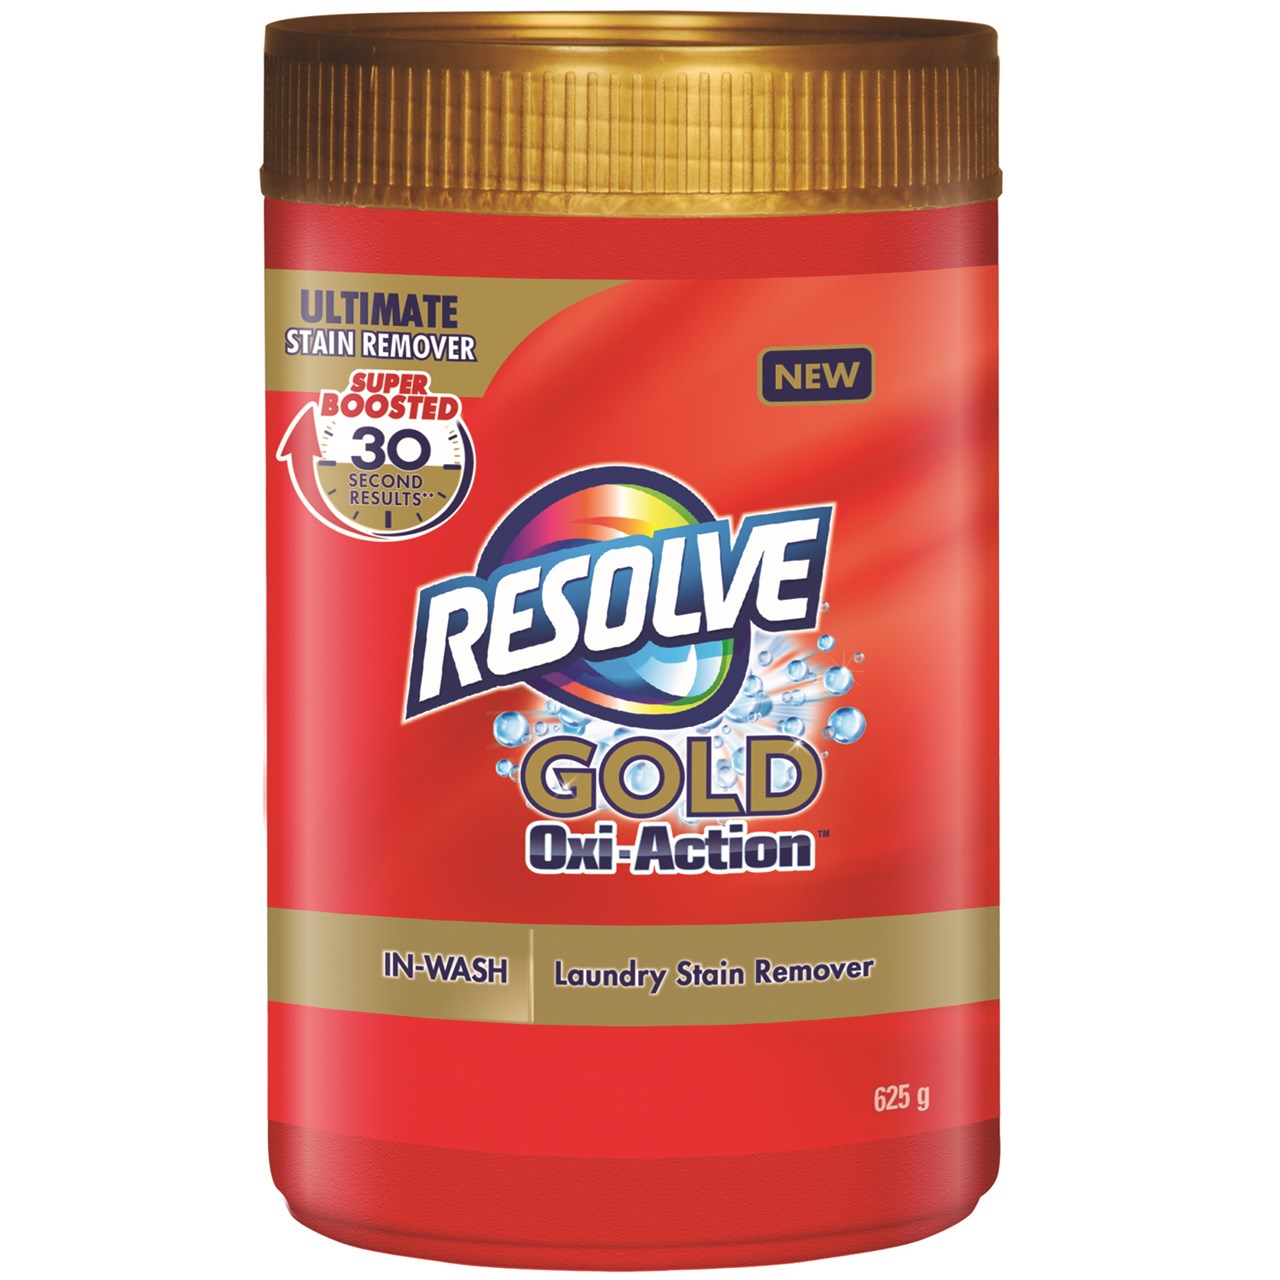 new-resolve-electronic-rebate-available-get-up-to-8-back-to-try